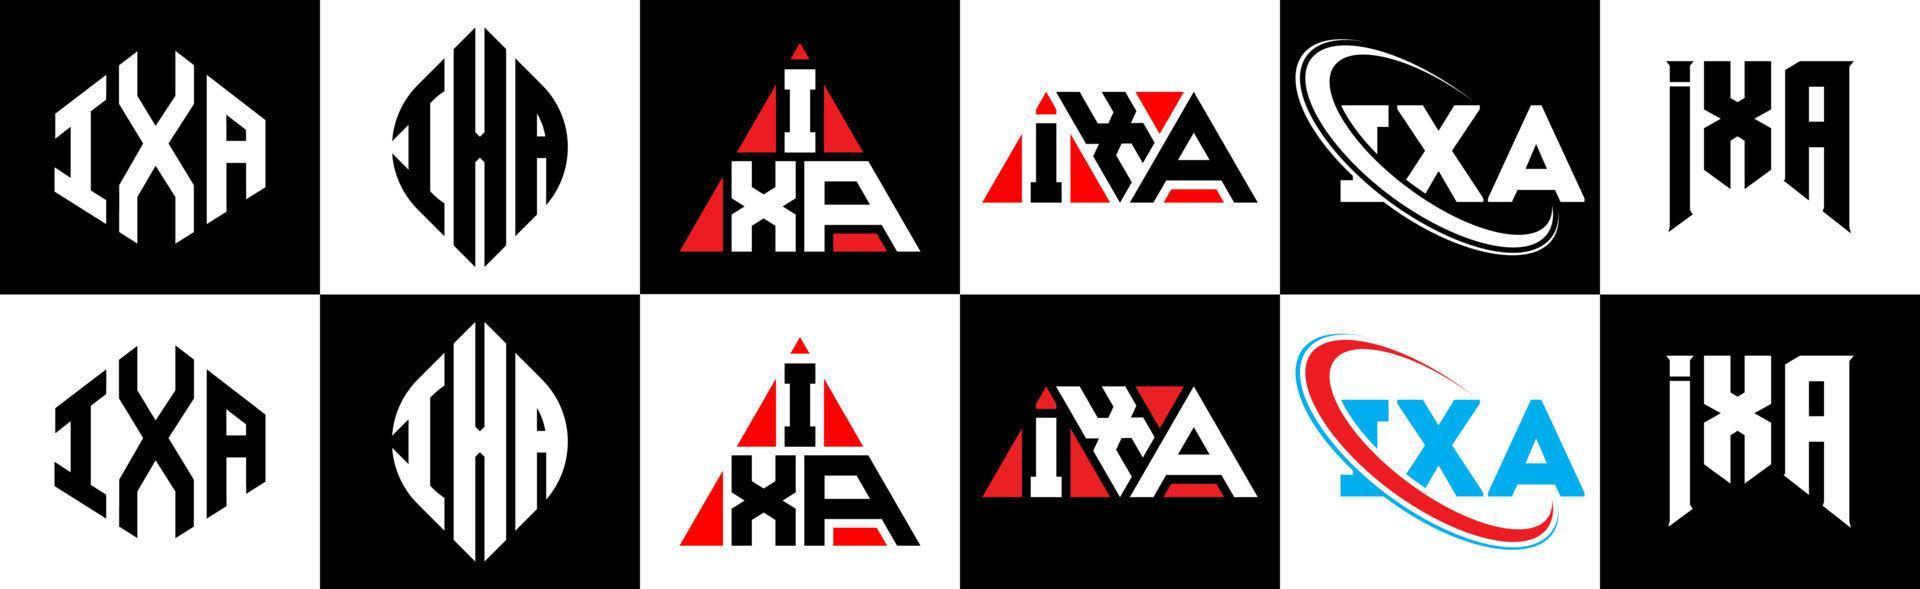 IXA letter logo design in six style. IXA polygon, circle, triangle, hexagon, flat and simple style with black and white color variation letter logo set in one artboard. IXA minimalist and classic logo vector